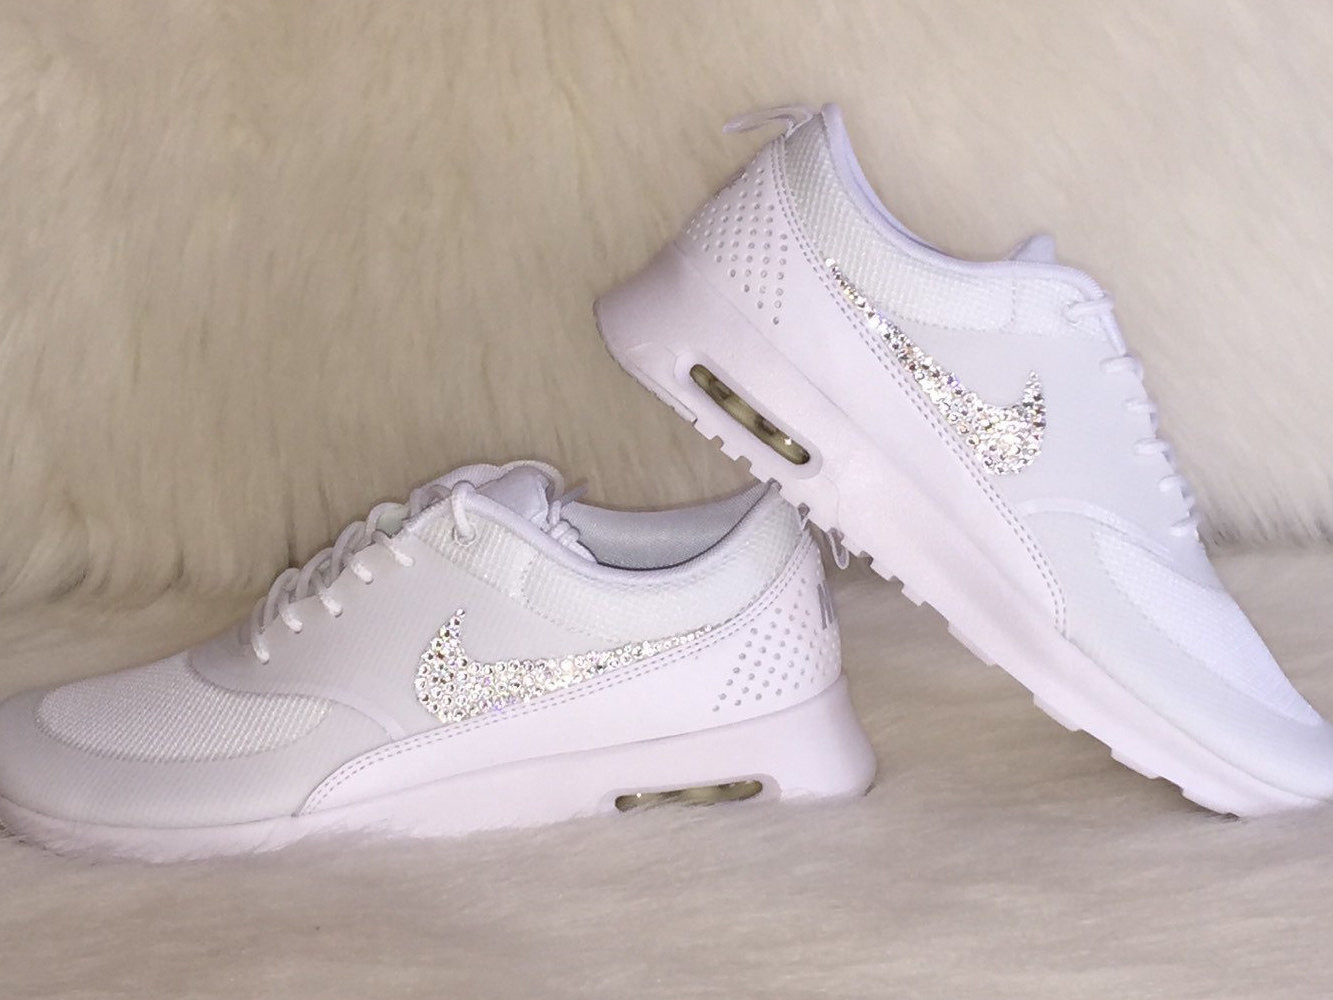 Nike Wedding Shoes
 NEW just IN HOT Sale Women s Nike Air Max by